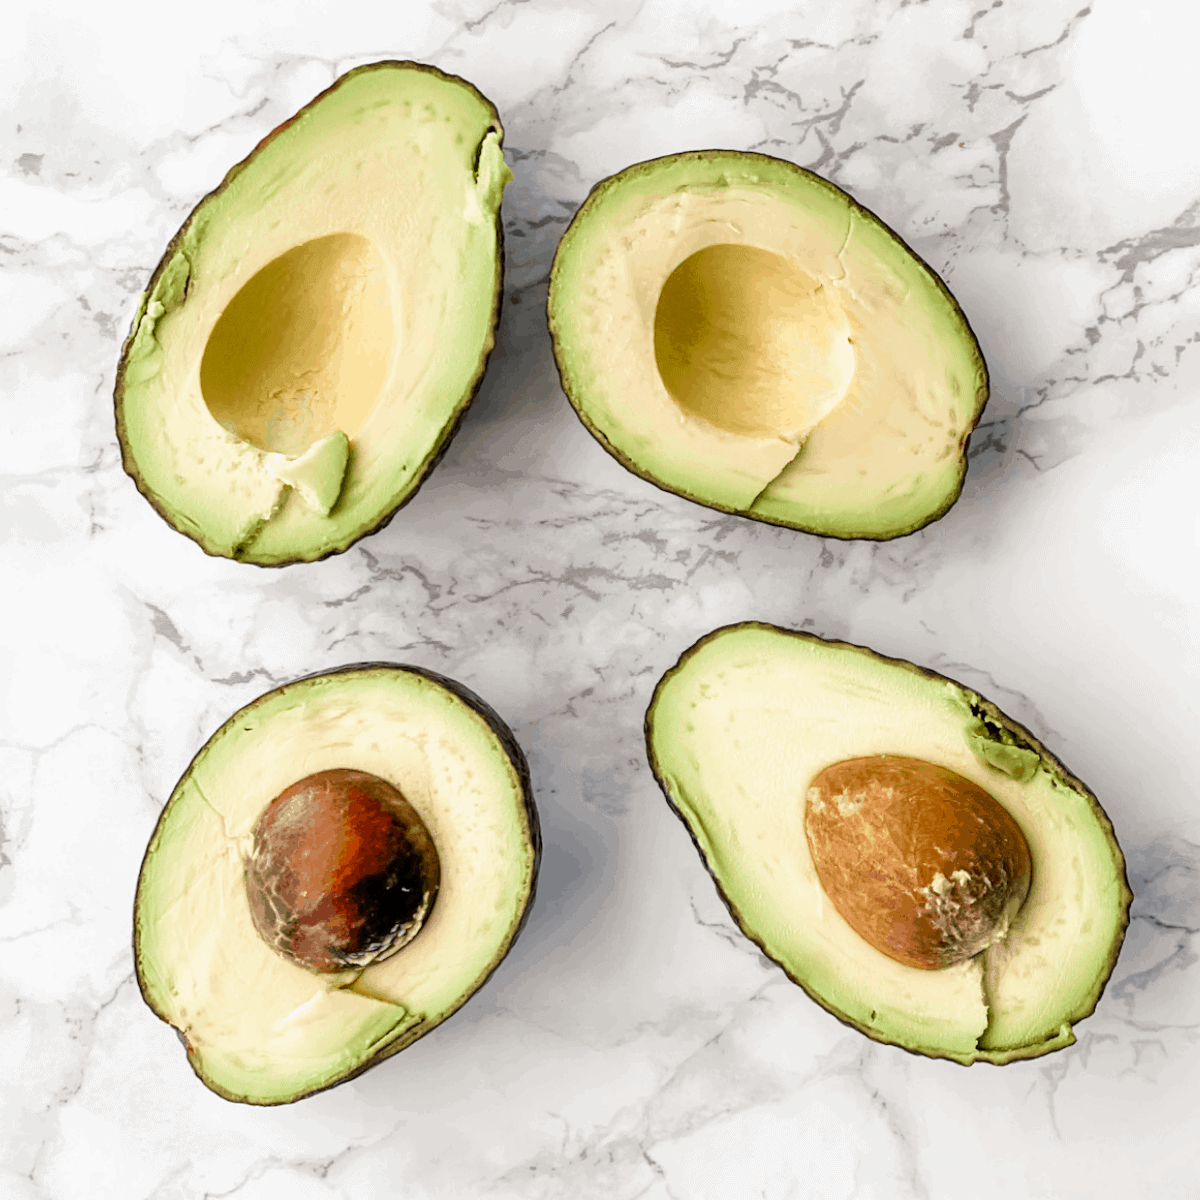 How to Safely Cut an Avocado Without Cutting Yourself